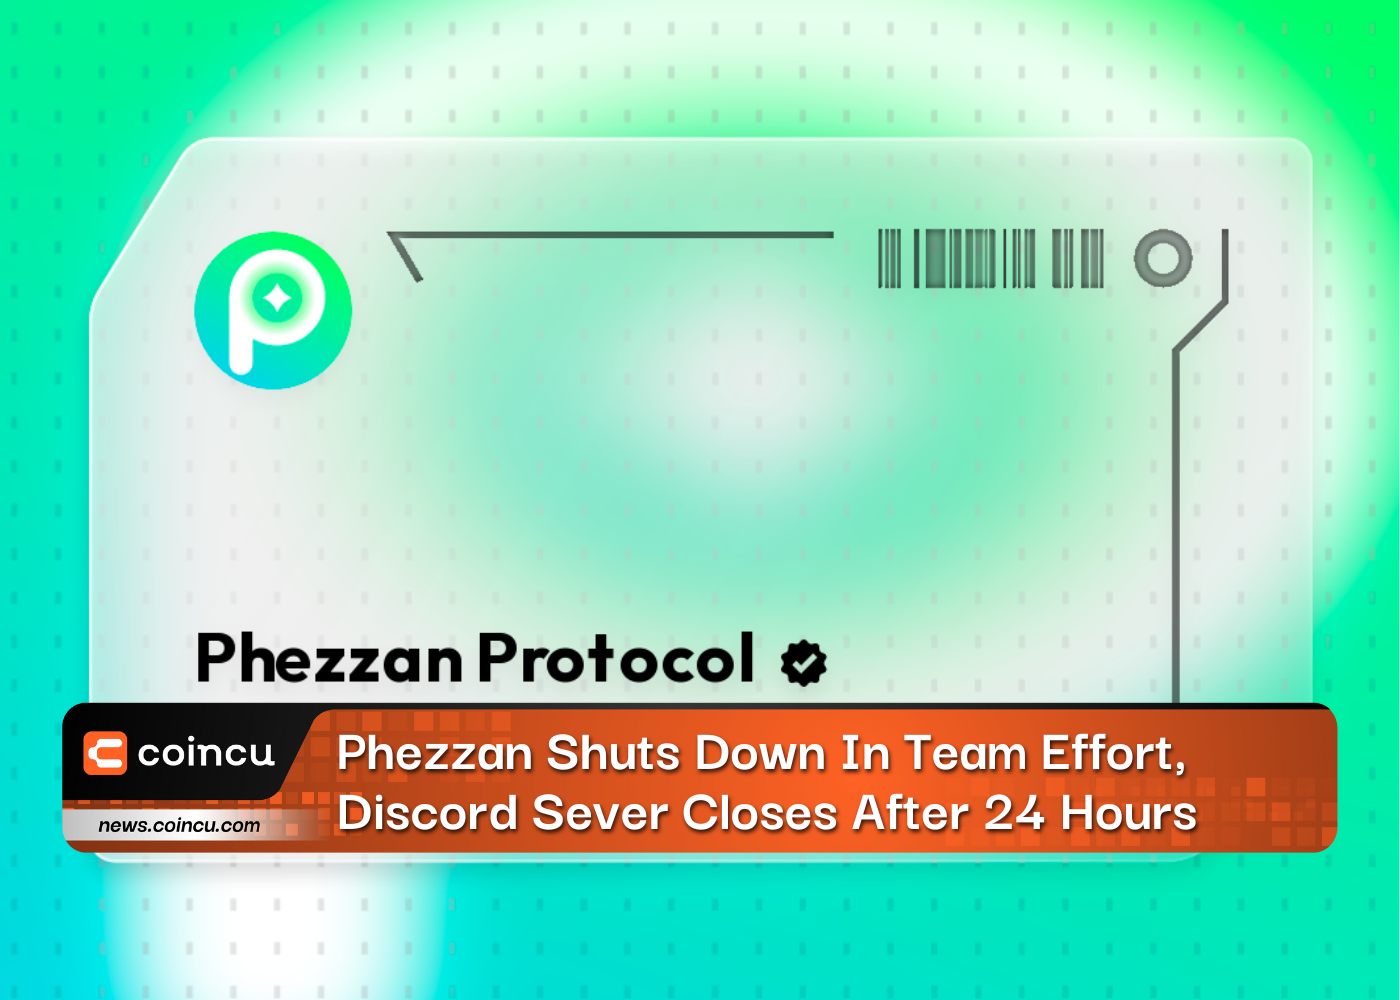 Phezzan Shuts Down In Team Effort, Discord Sever Closes After 24 Hours